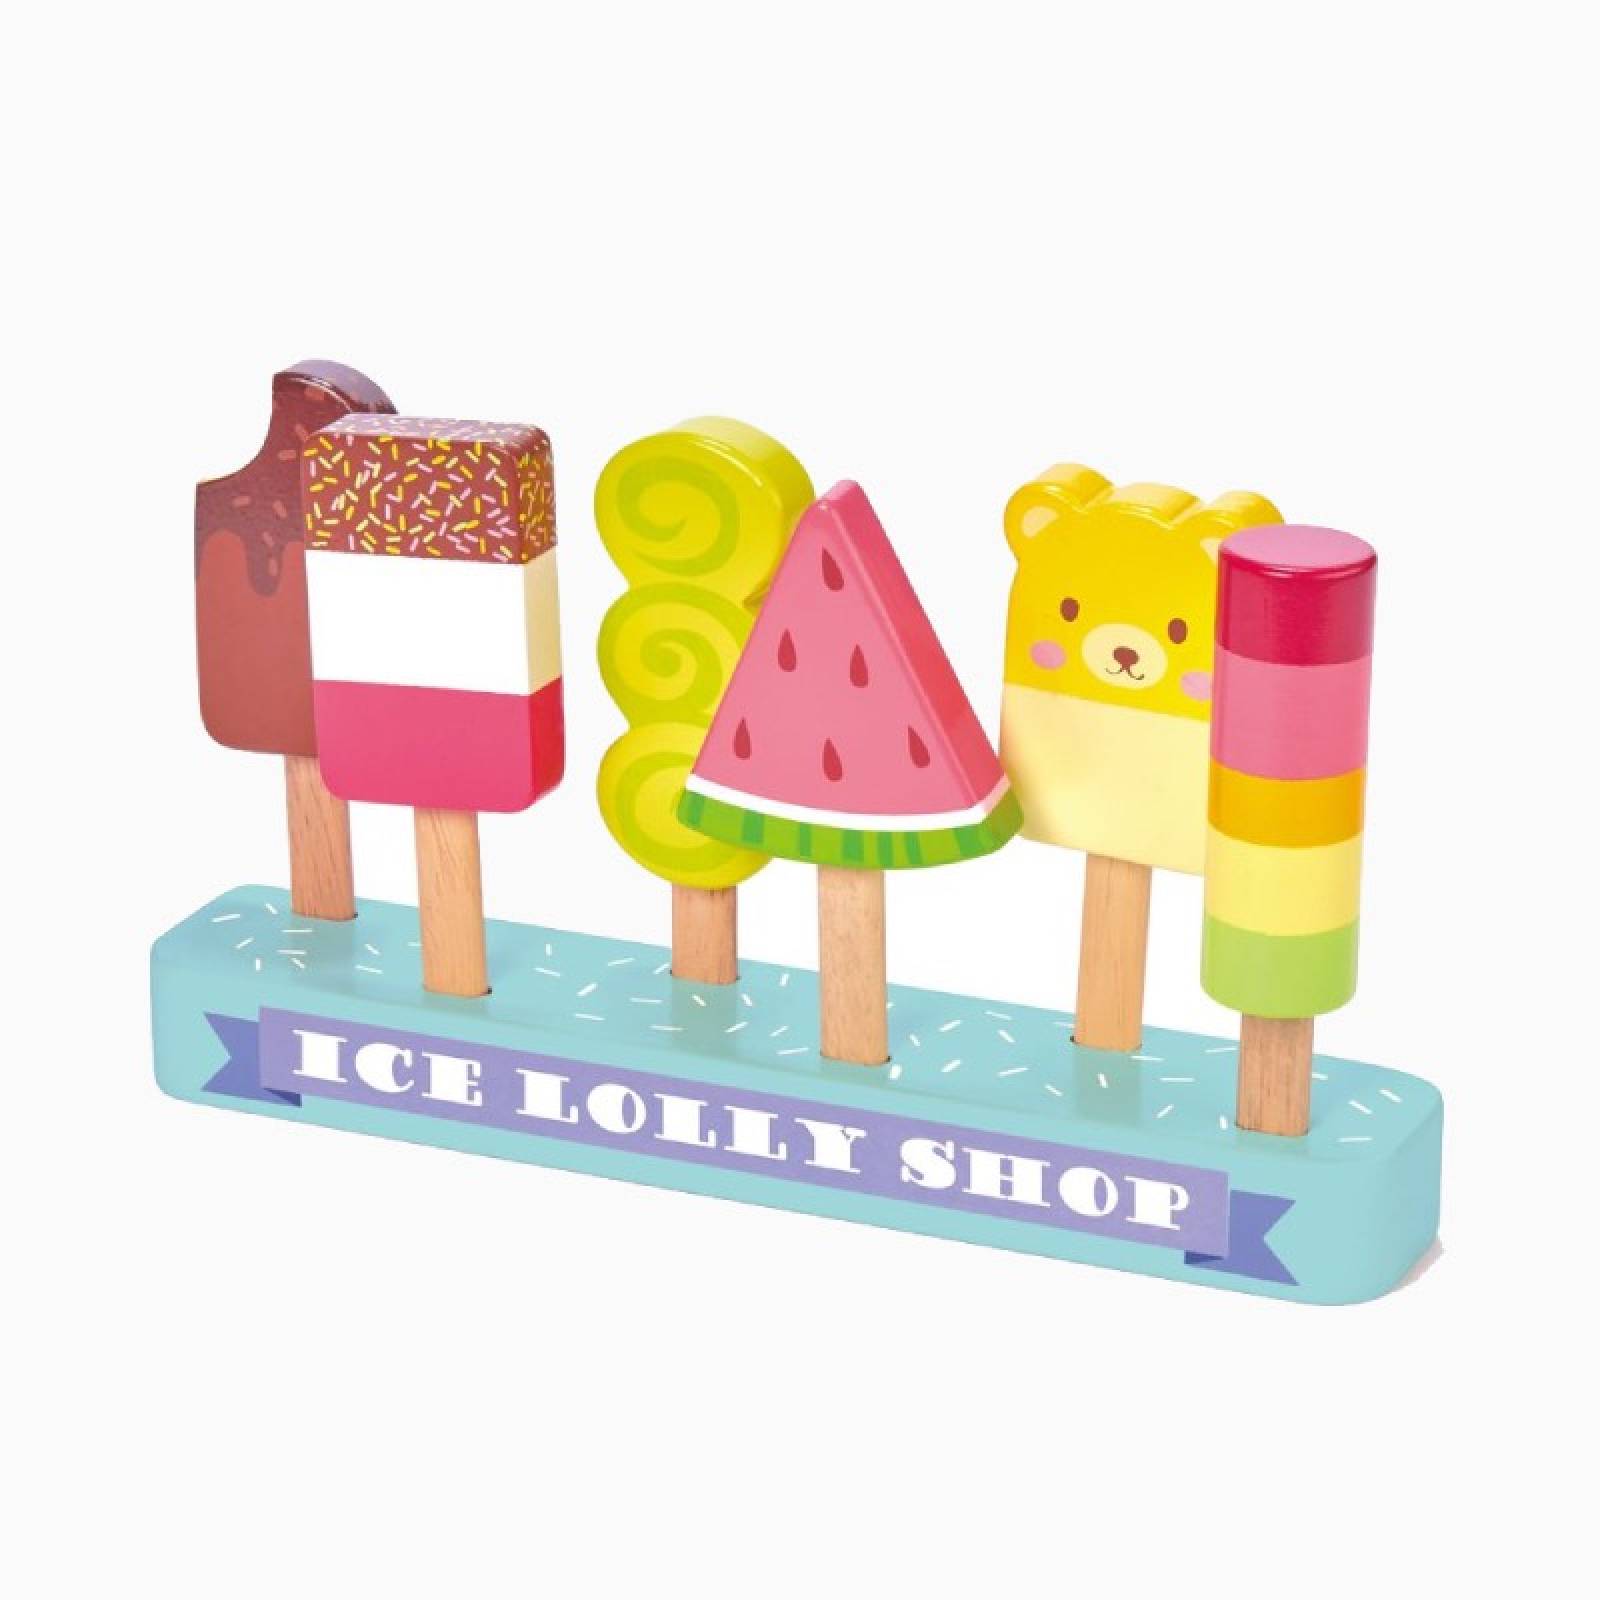 Ice Lolly Shop Wooden Play Food Set 3+ thumbnails